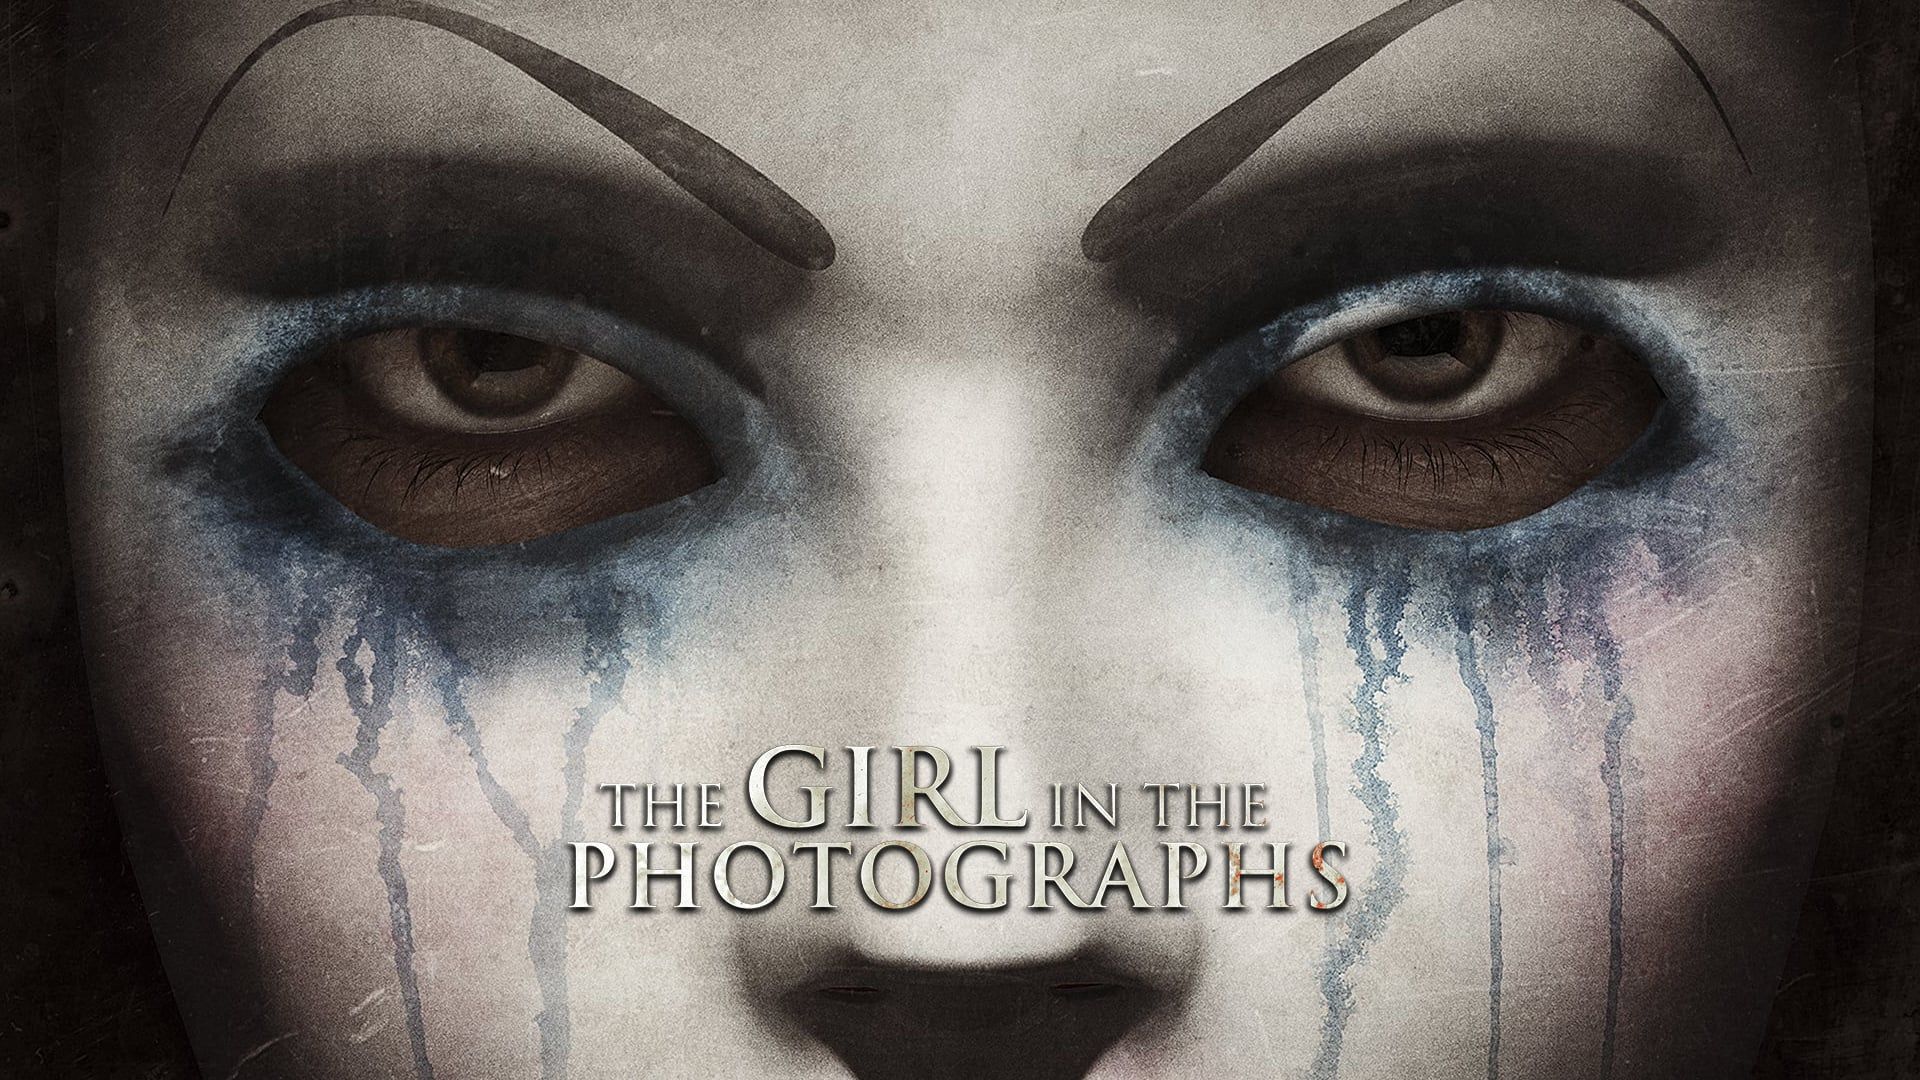 Cubierta de The Girl in the Photographs